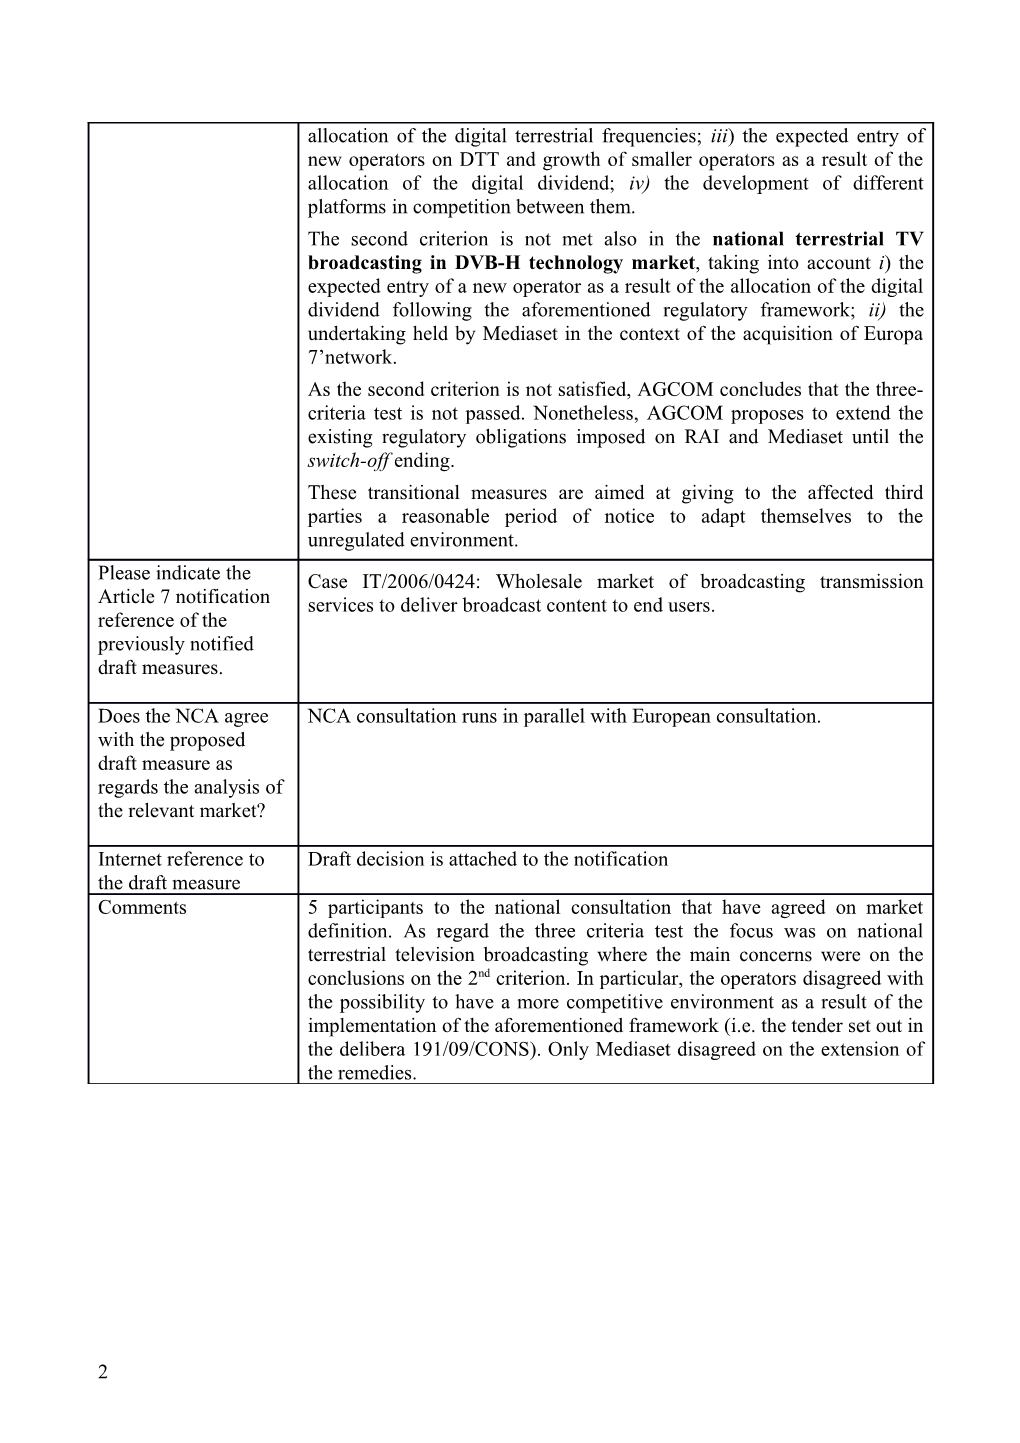 Short Form Relating to Notifications of Draft Measures Pursuant to Article 7 Of